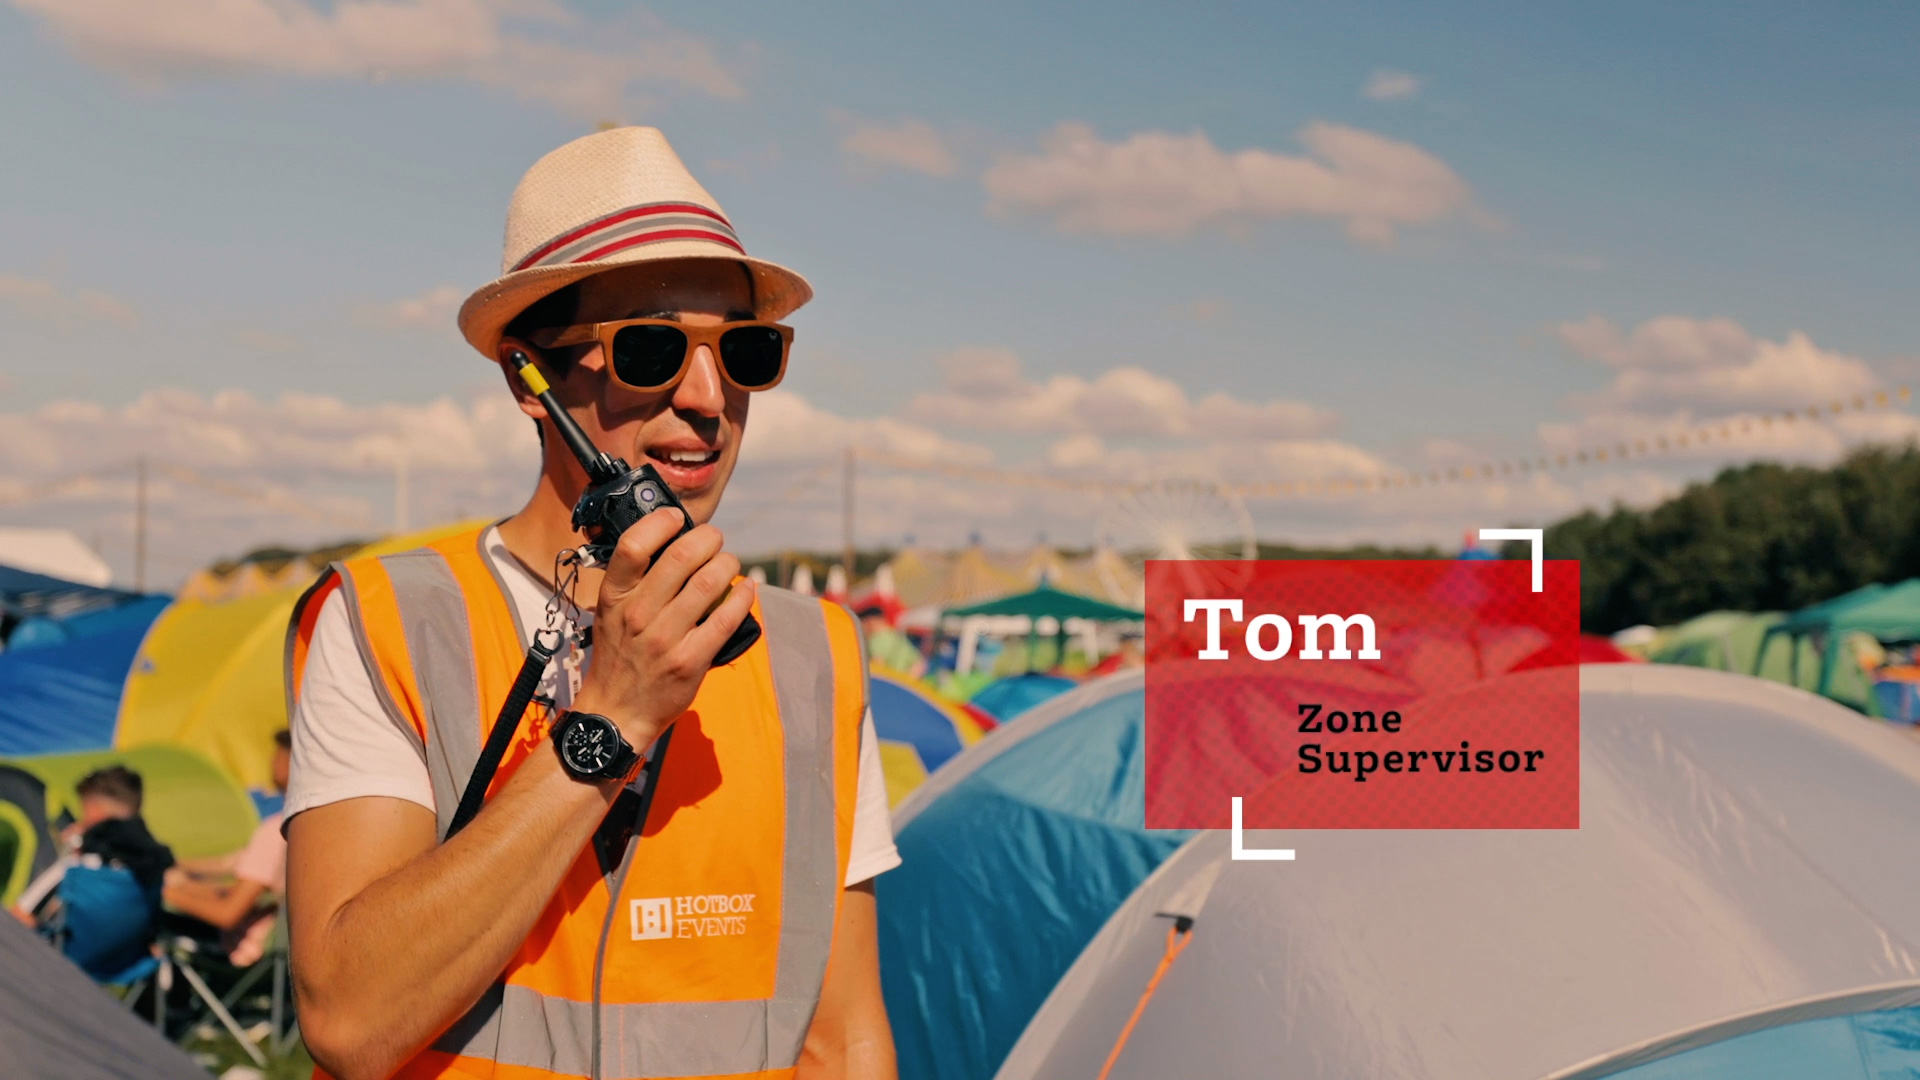 Tom a Campsite Supervisor working with Hotbox Events at Leeds Festival!